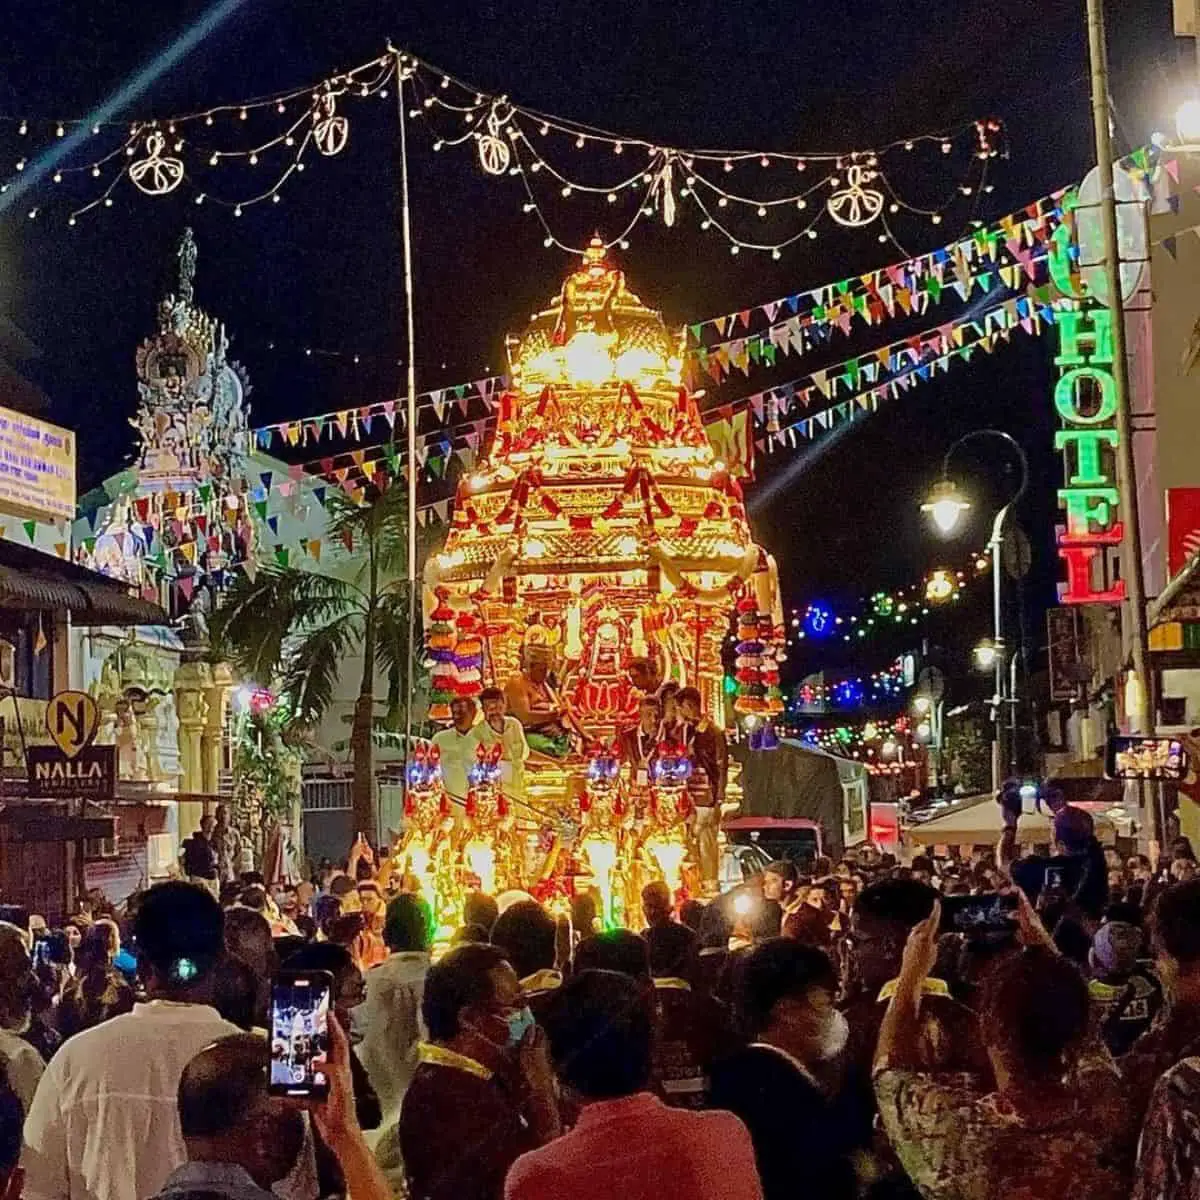 Crowds in Little India celebrating Thaipusam at night in Little India Penang